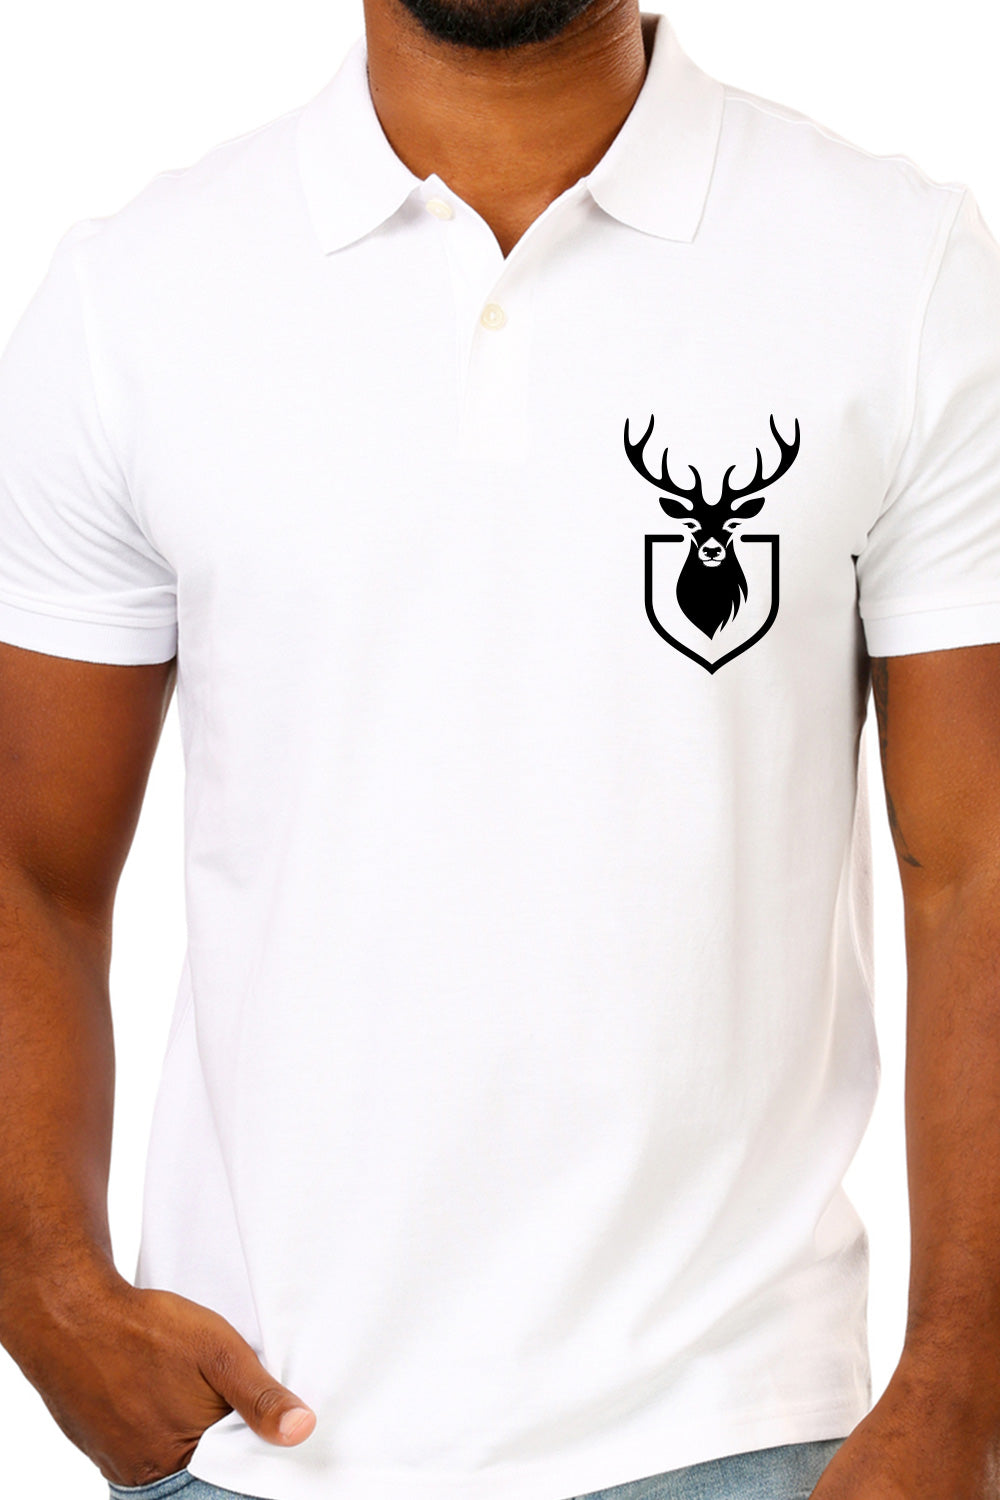 White Premium Polo T-Shirt with Deer Minimal Silhouette Graphics on Pocket Printed